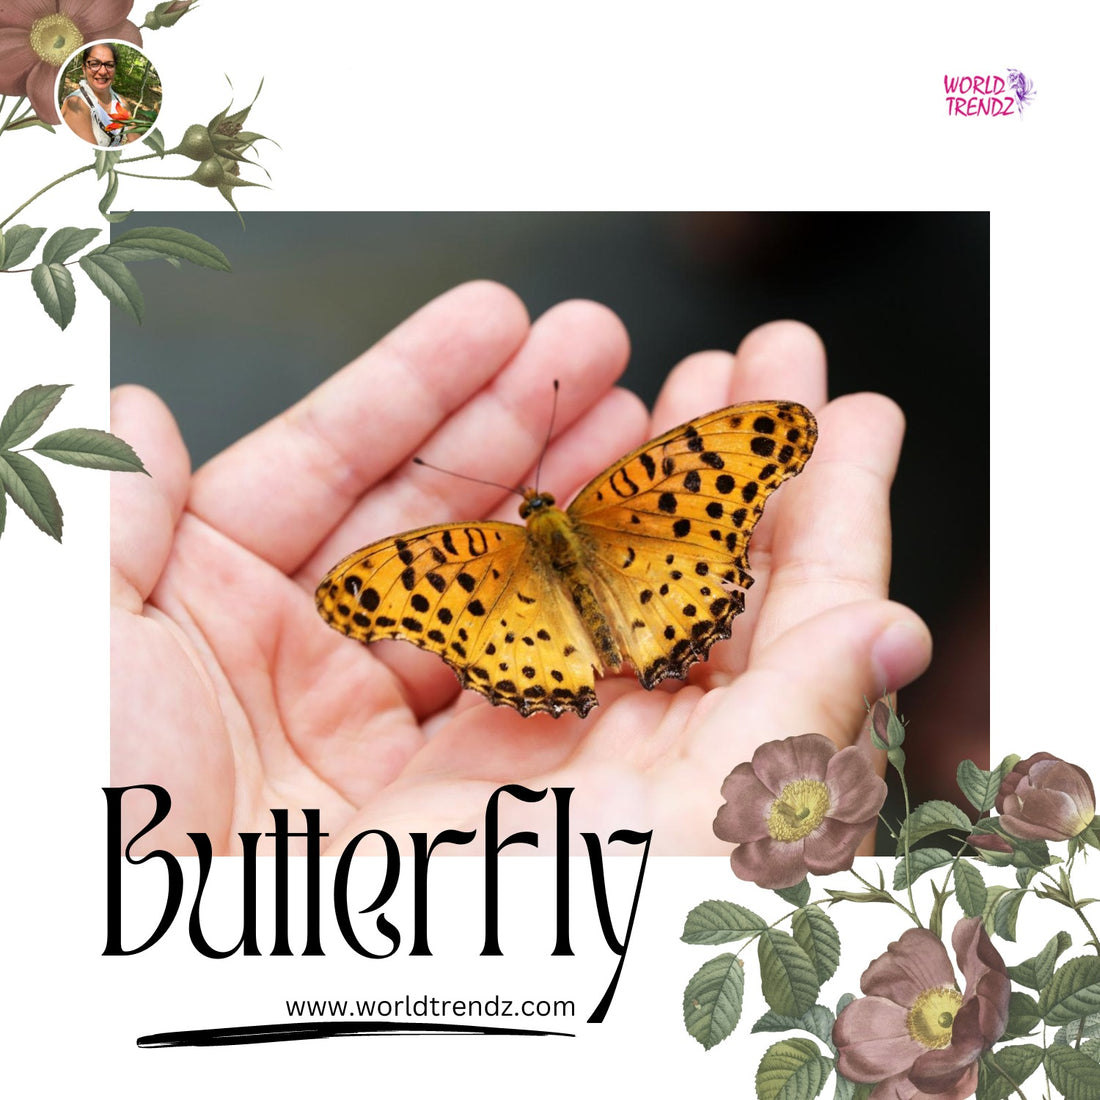 Fun Facts About Butterfly